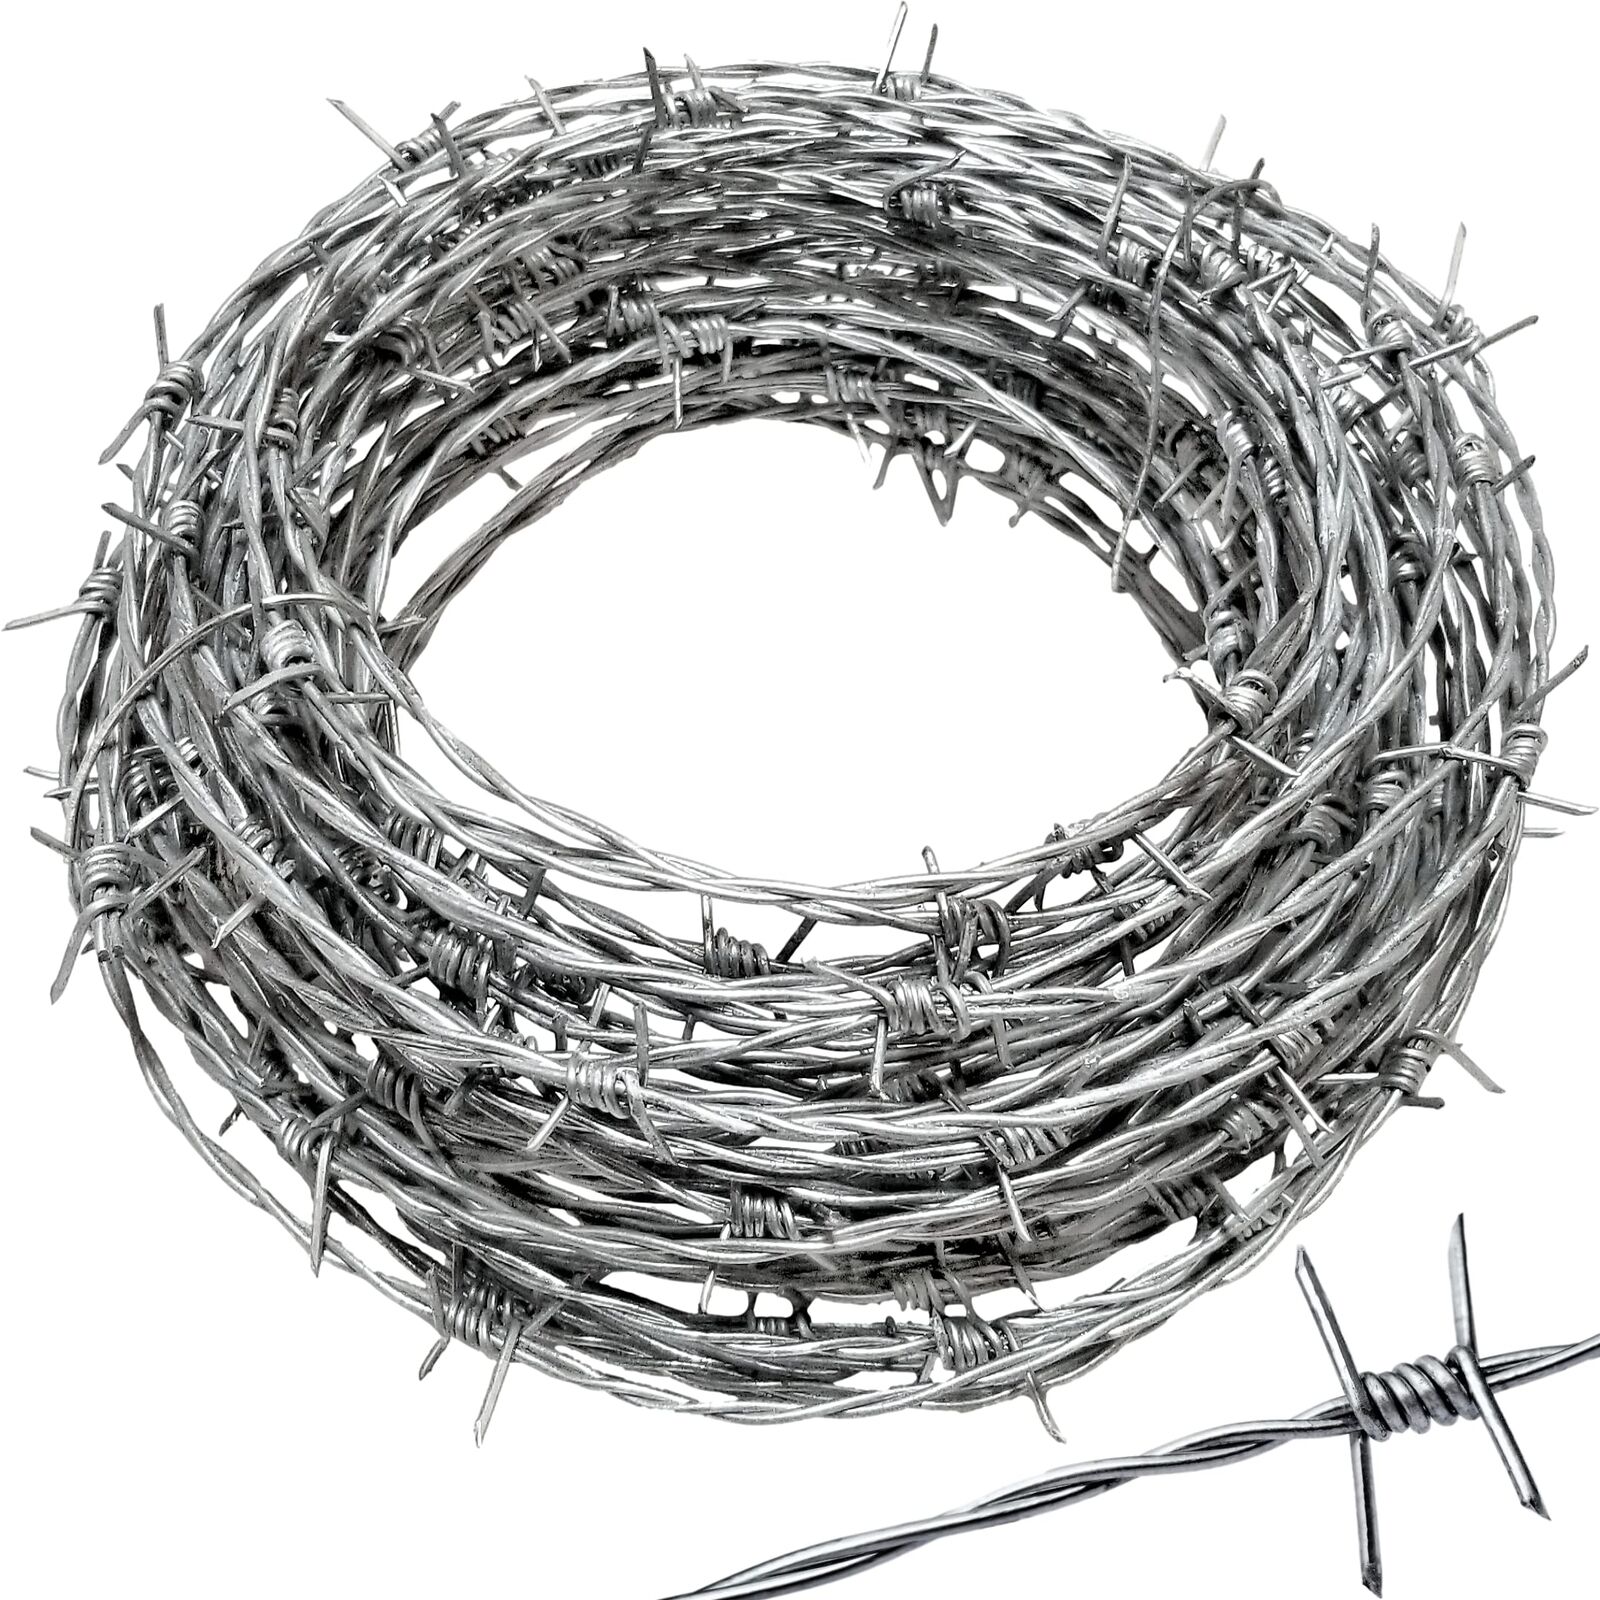 Real Barbed Wire 50Ft 18 Gauge - Great for Crafts Fences and Critter Deterrent